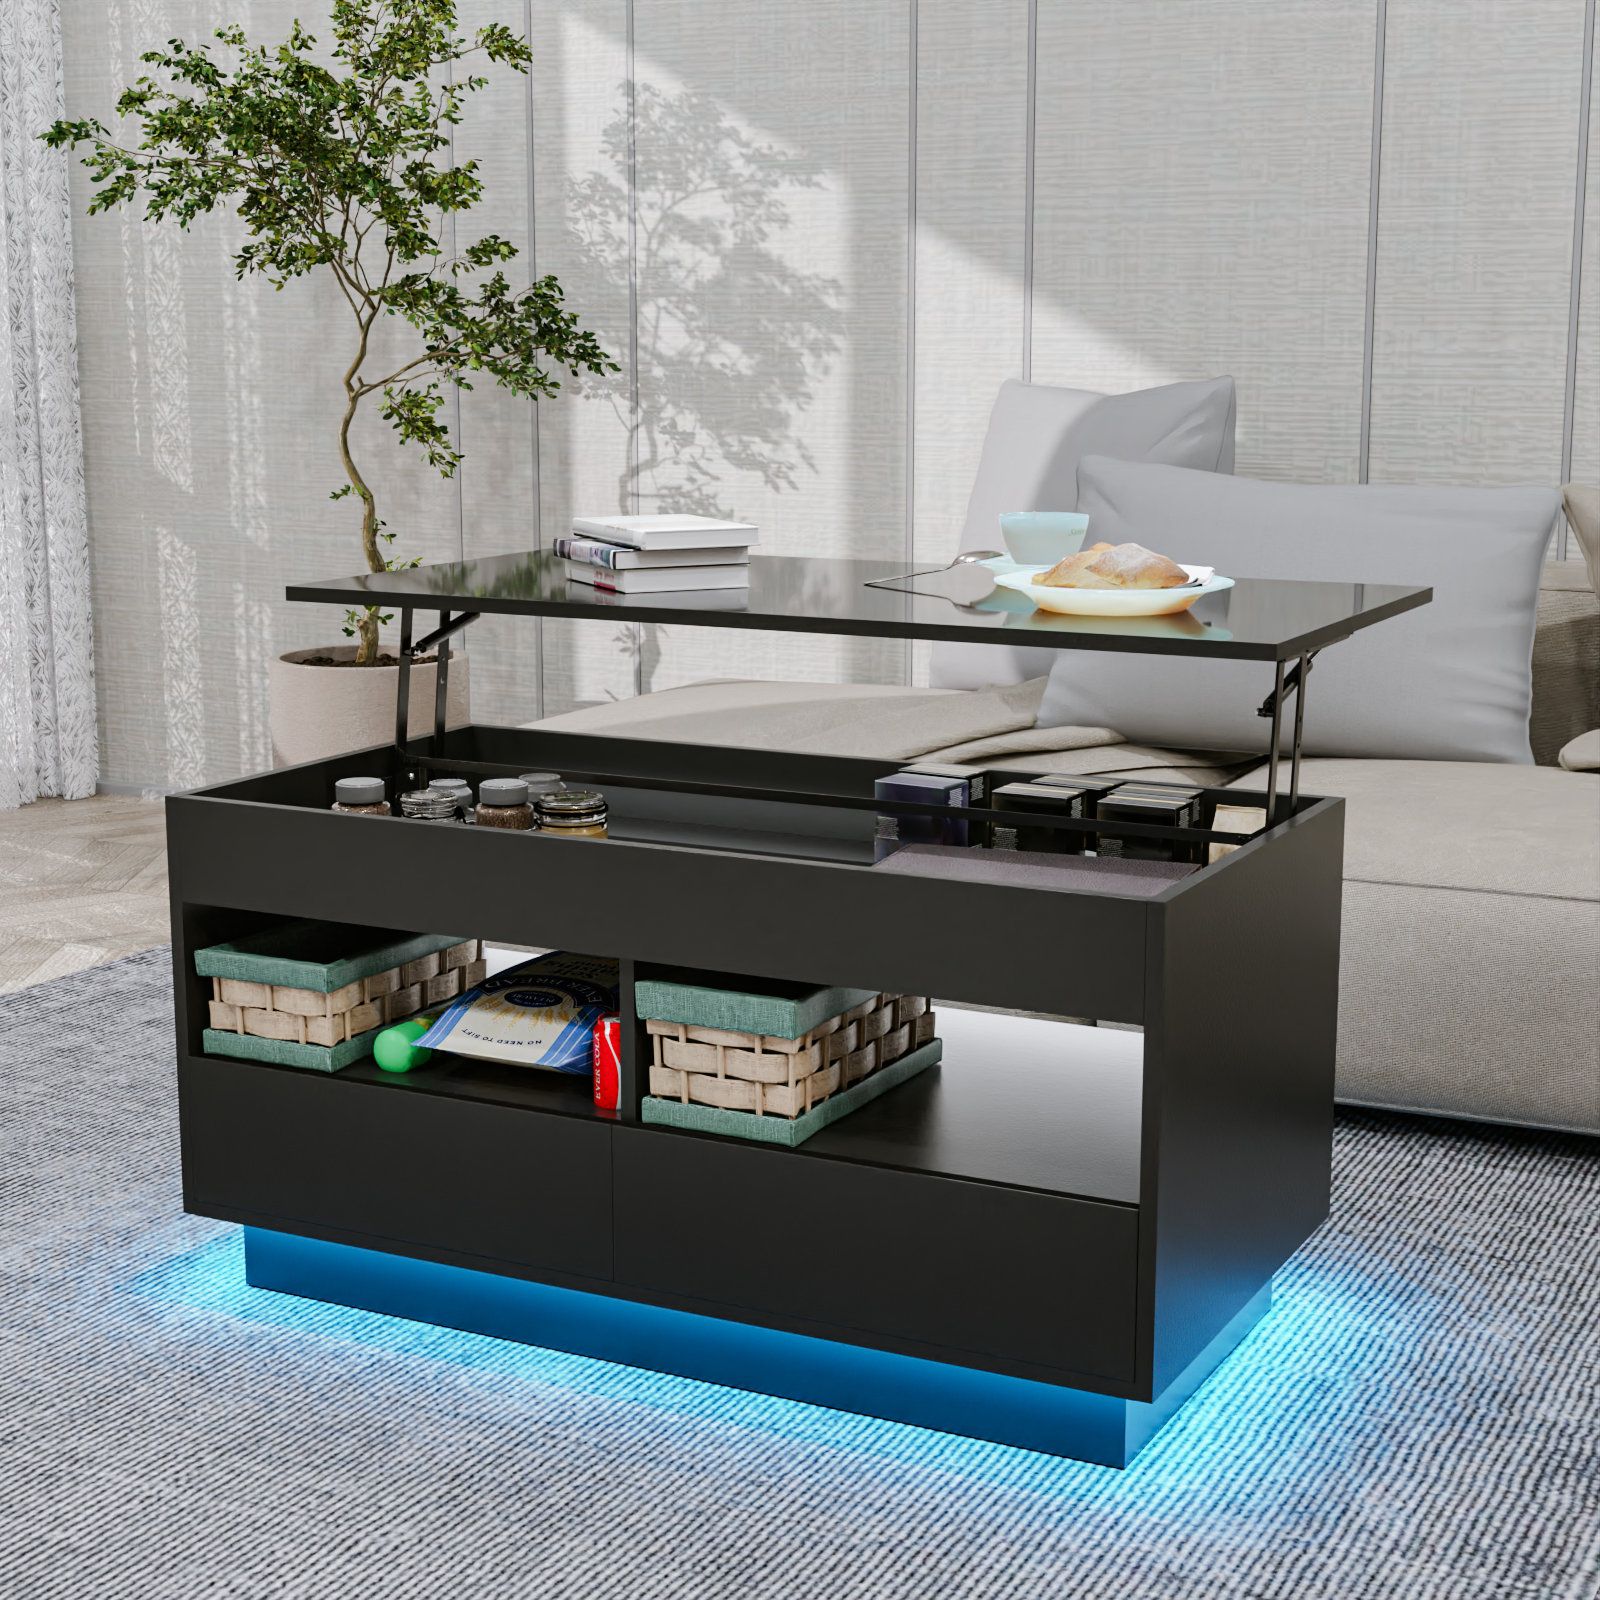 Wrought Studio Emmrie Lift Top Coffee Table With Rgb Led Lights, Hidden  Compartment, Drawers And Open Shelves & Reviews | Wayfair With Coffee Tables With Drawers And Led Lights (View 12 of 15)